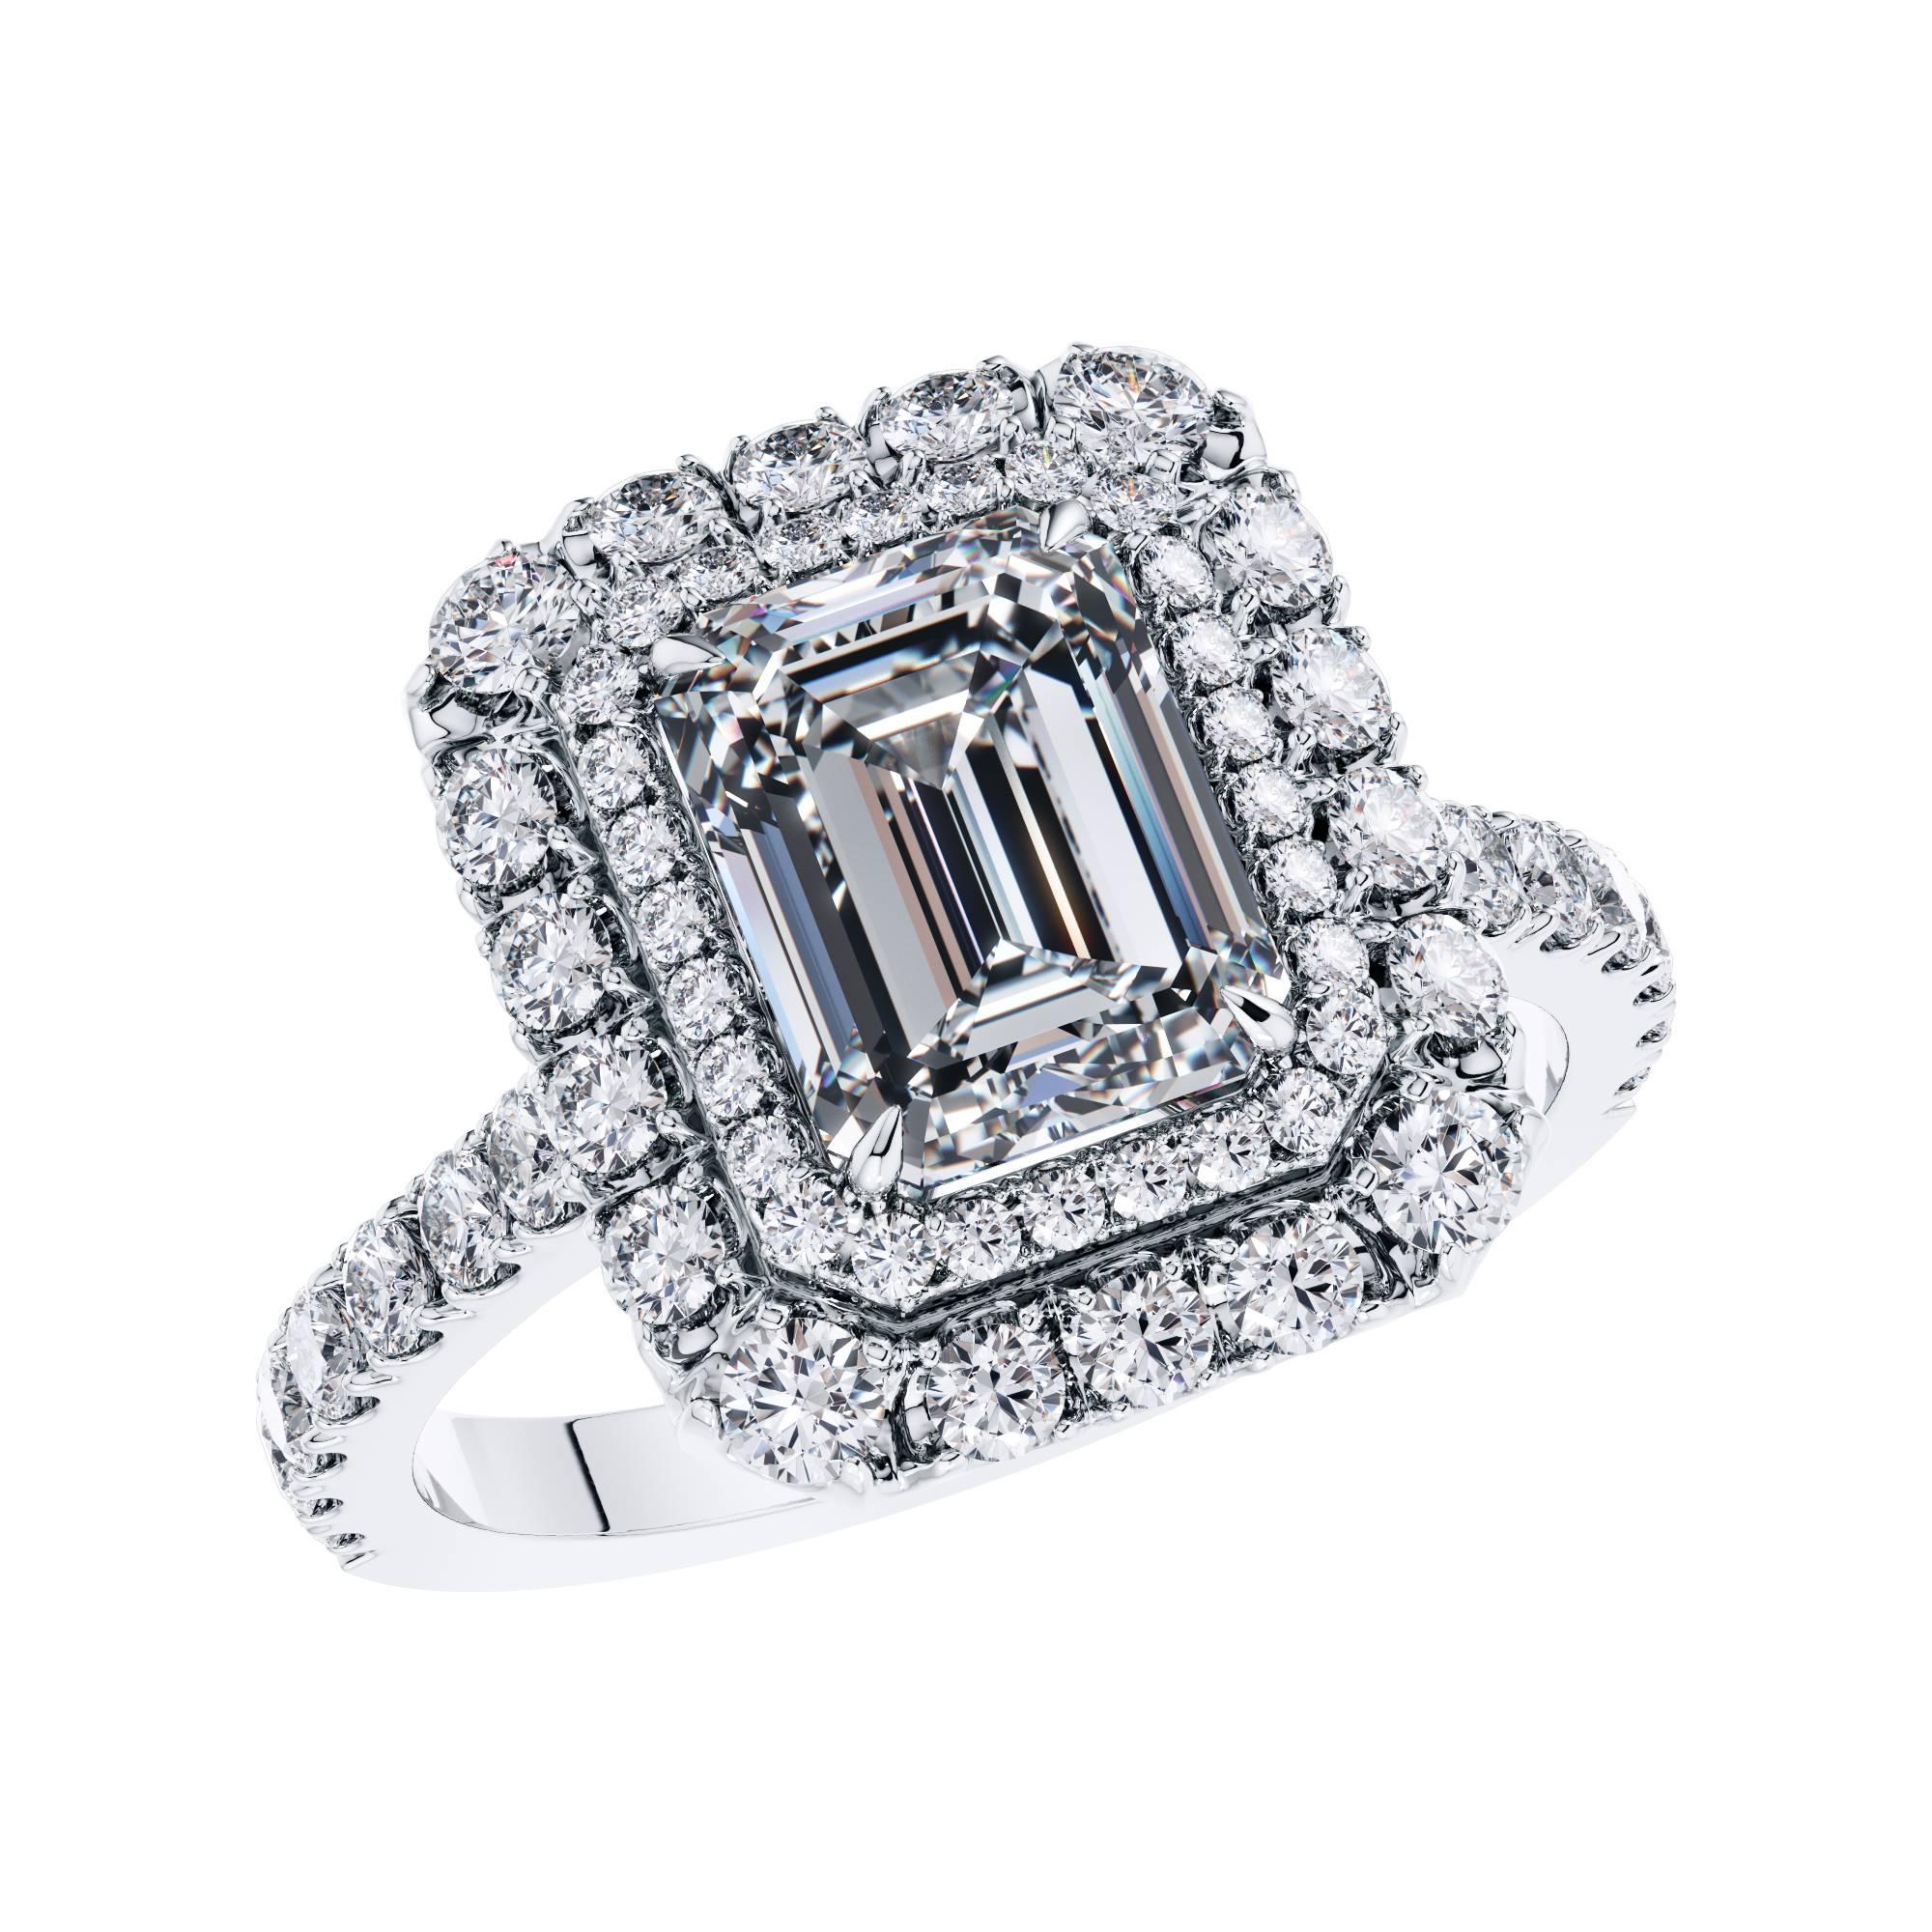 This Stunning GIA Certified 2.01 Carat white color E, clarity VS1 Emerald Cut Diamond which is set in the center of the Ring. It features 0.97 Carat  H SI1 Round Brilliant Diamonds around the sides and the Double Halo. An Engagement Ring with an